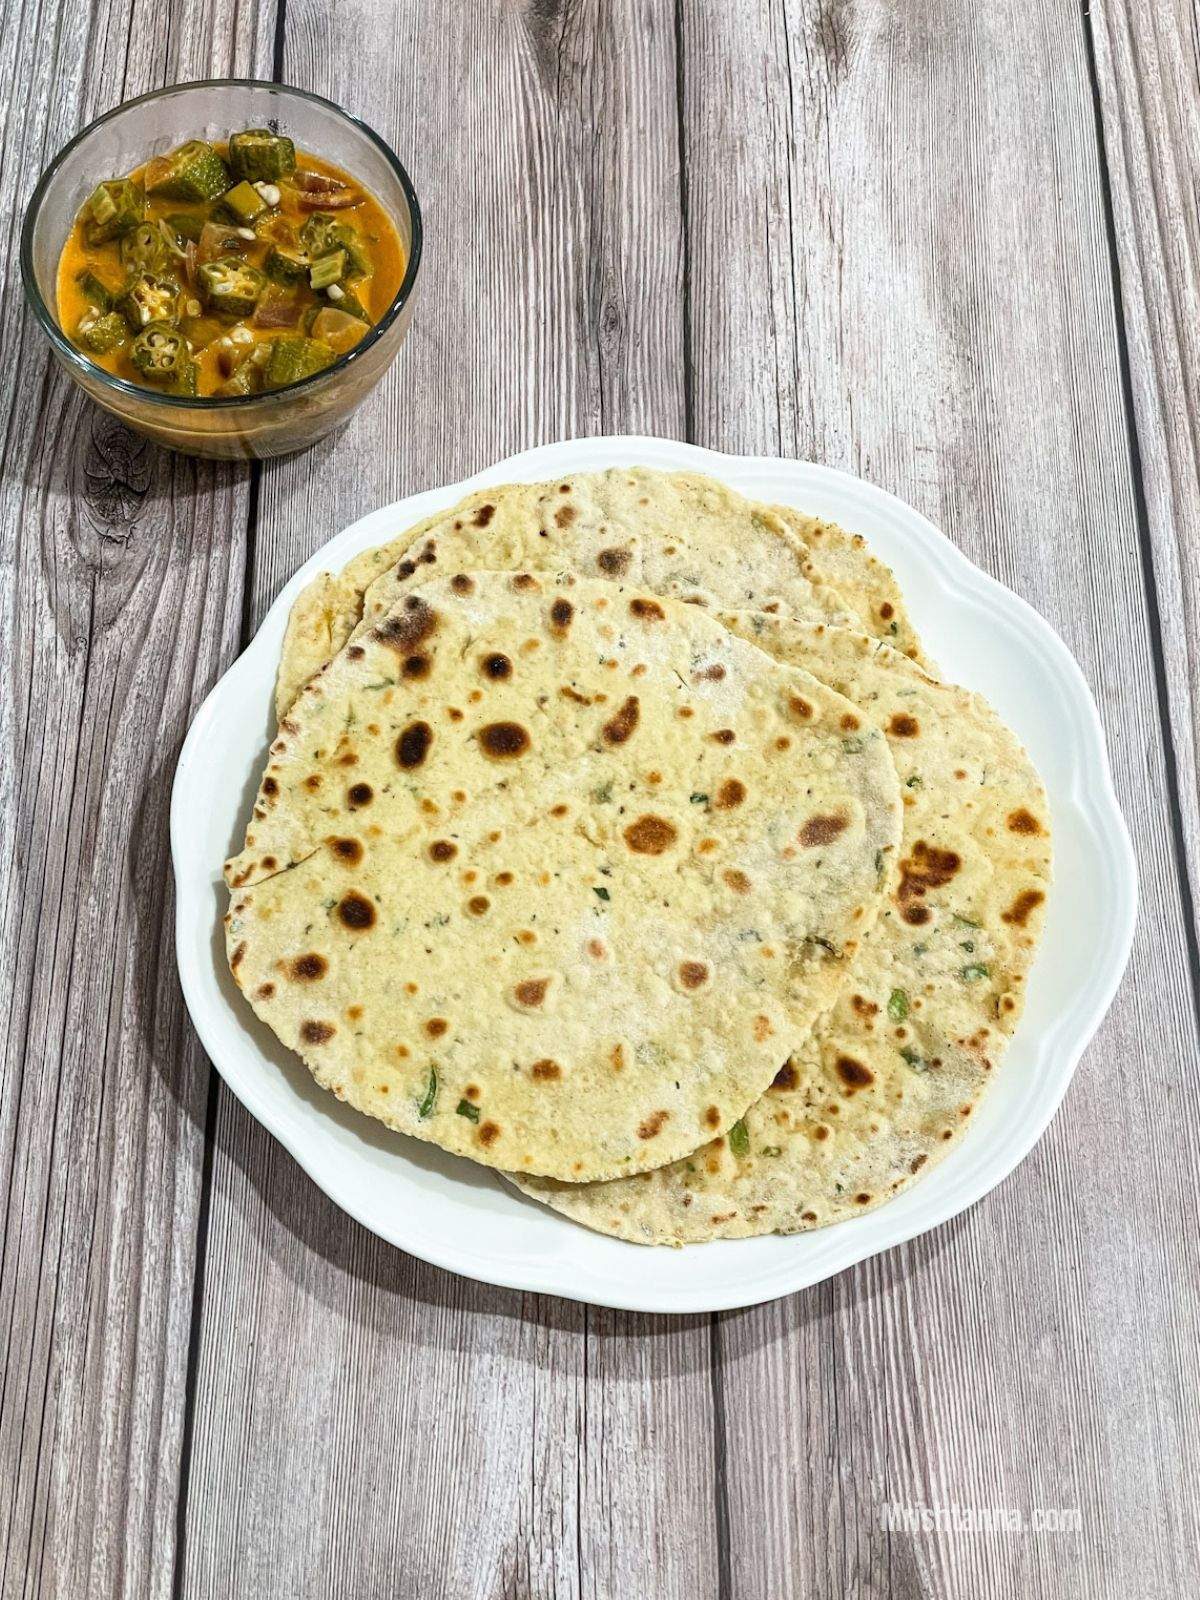 A plate is with besan roti on the wooden table.